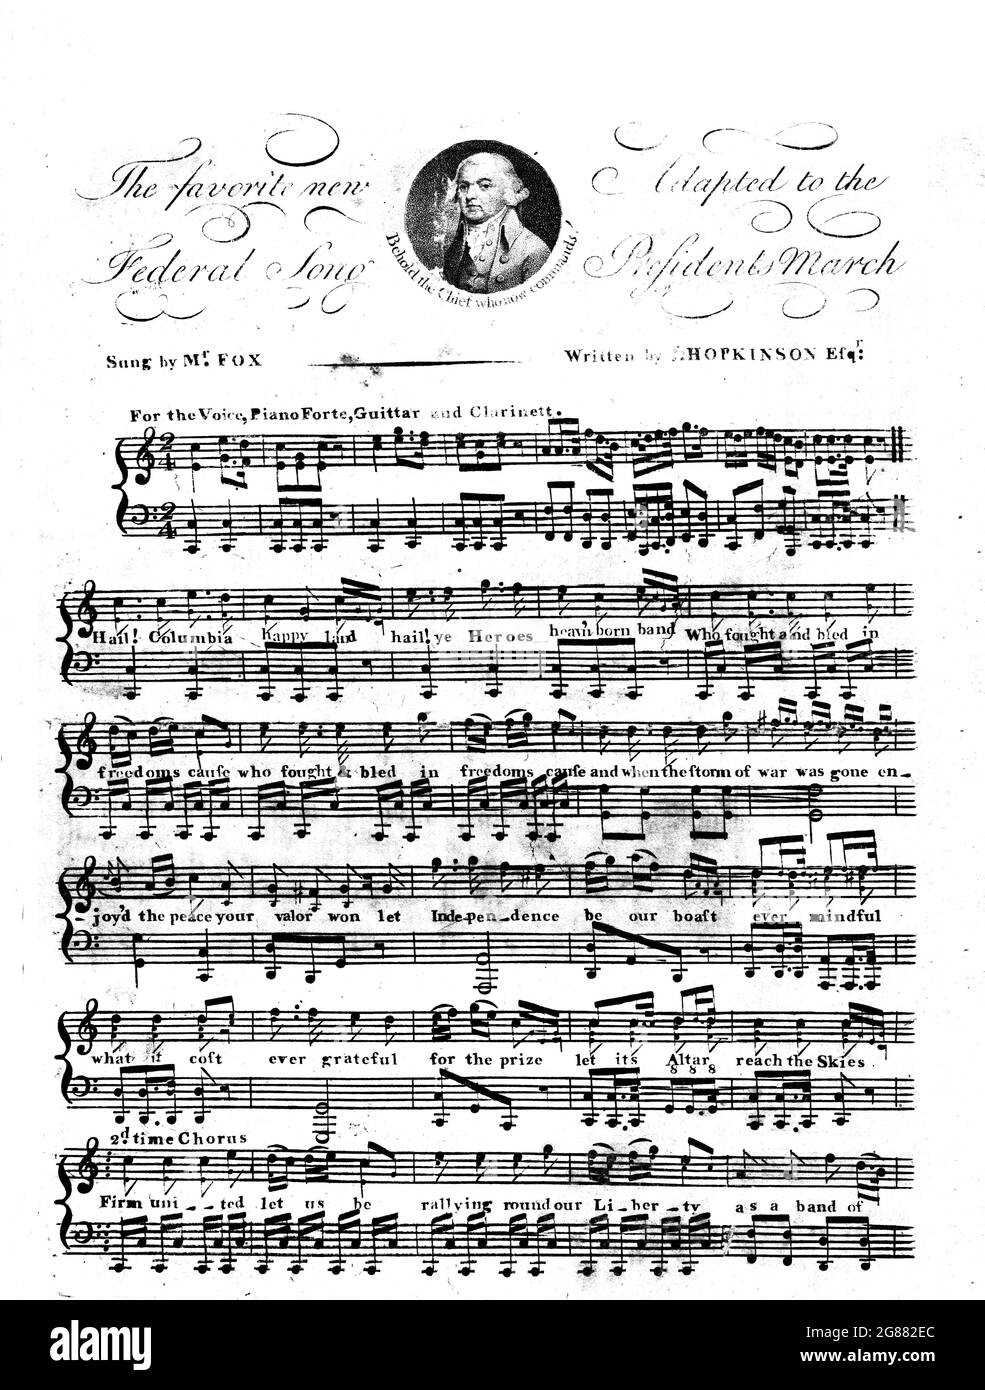 The New Federal Song (Hail Columbia), 1798 sheet music/ 1st Edition featuring an attached engraving of President John Adams. Stock Photo